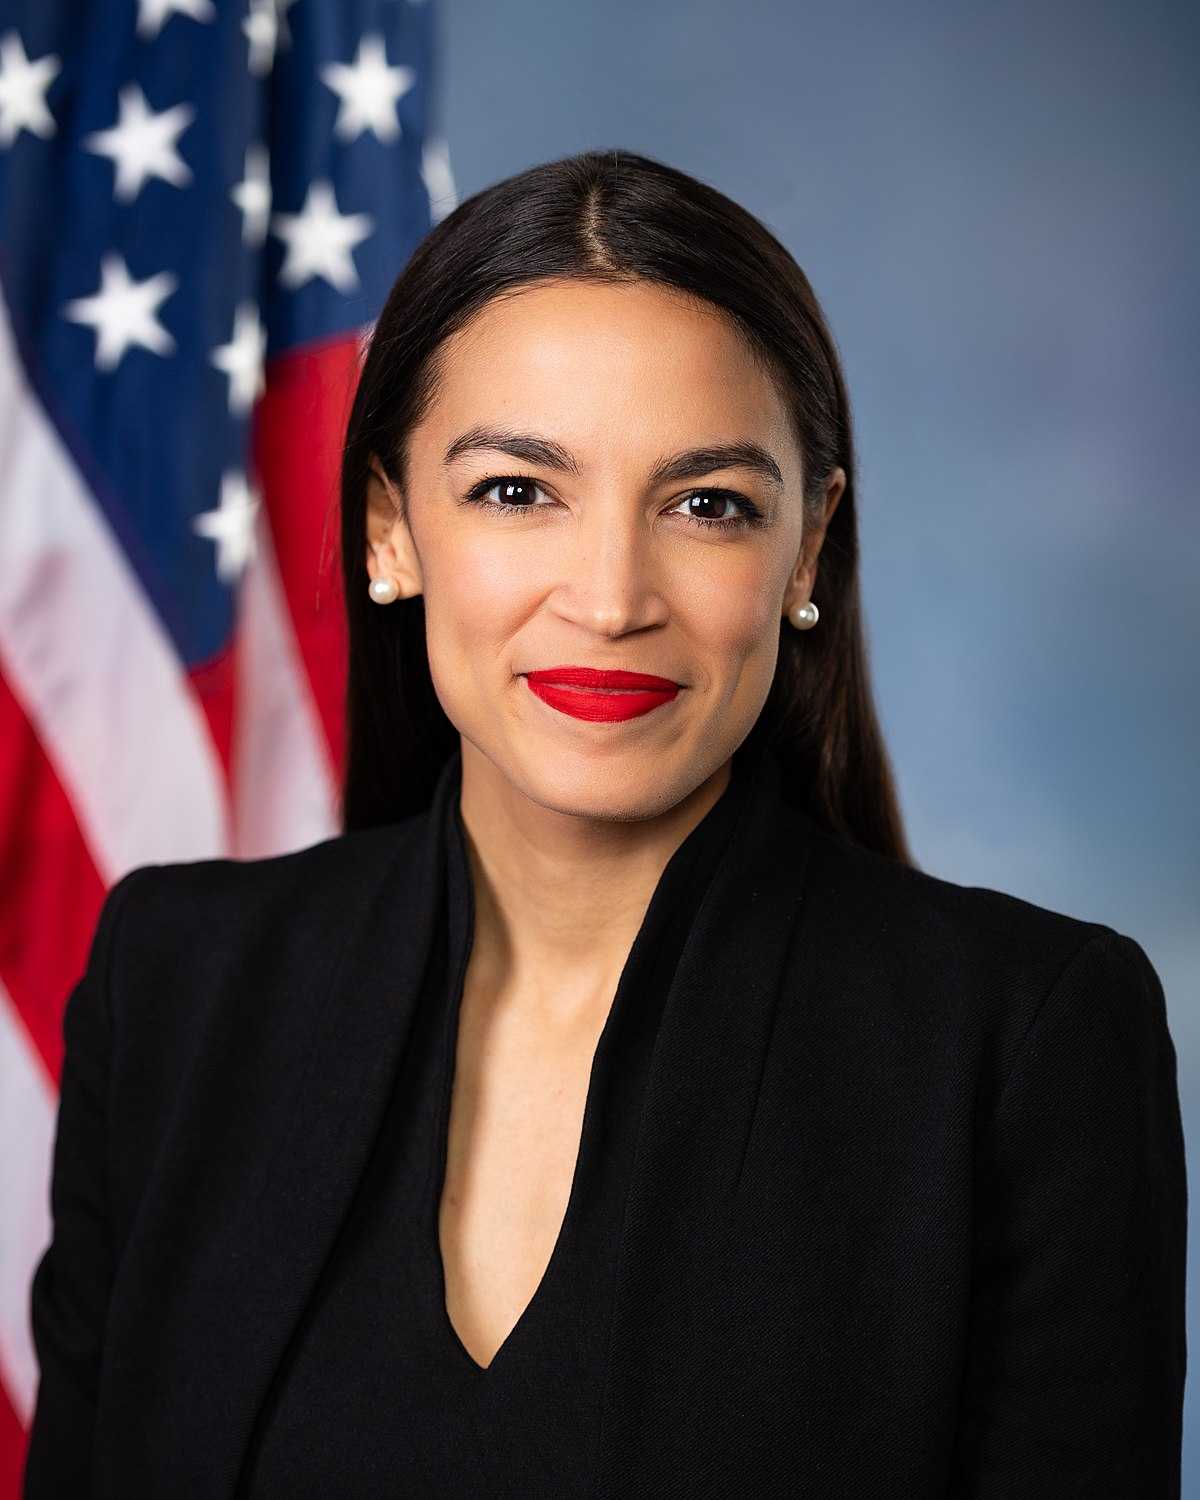 Alexandria Ocasio-Cortez hot pictures will get you all sweating - Page ...